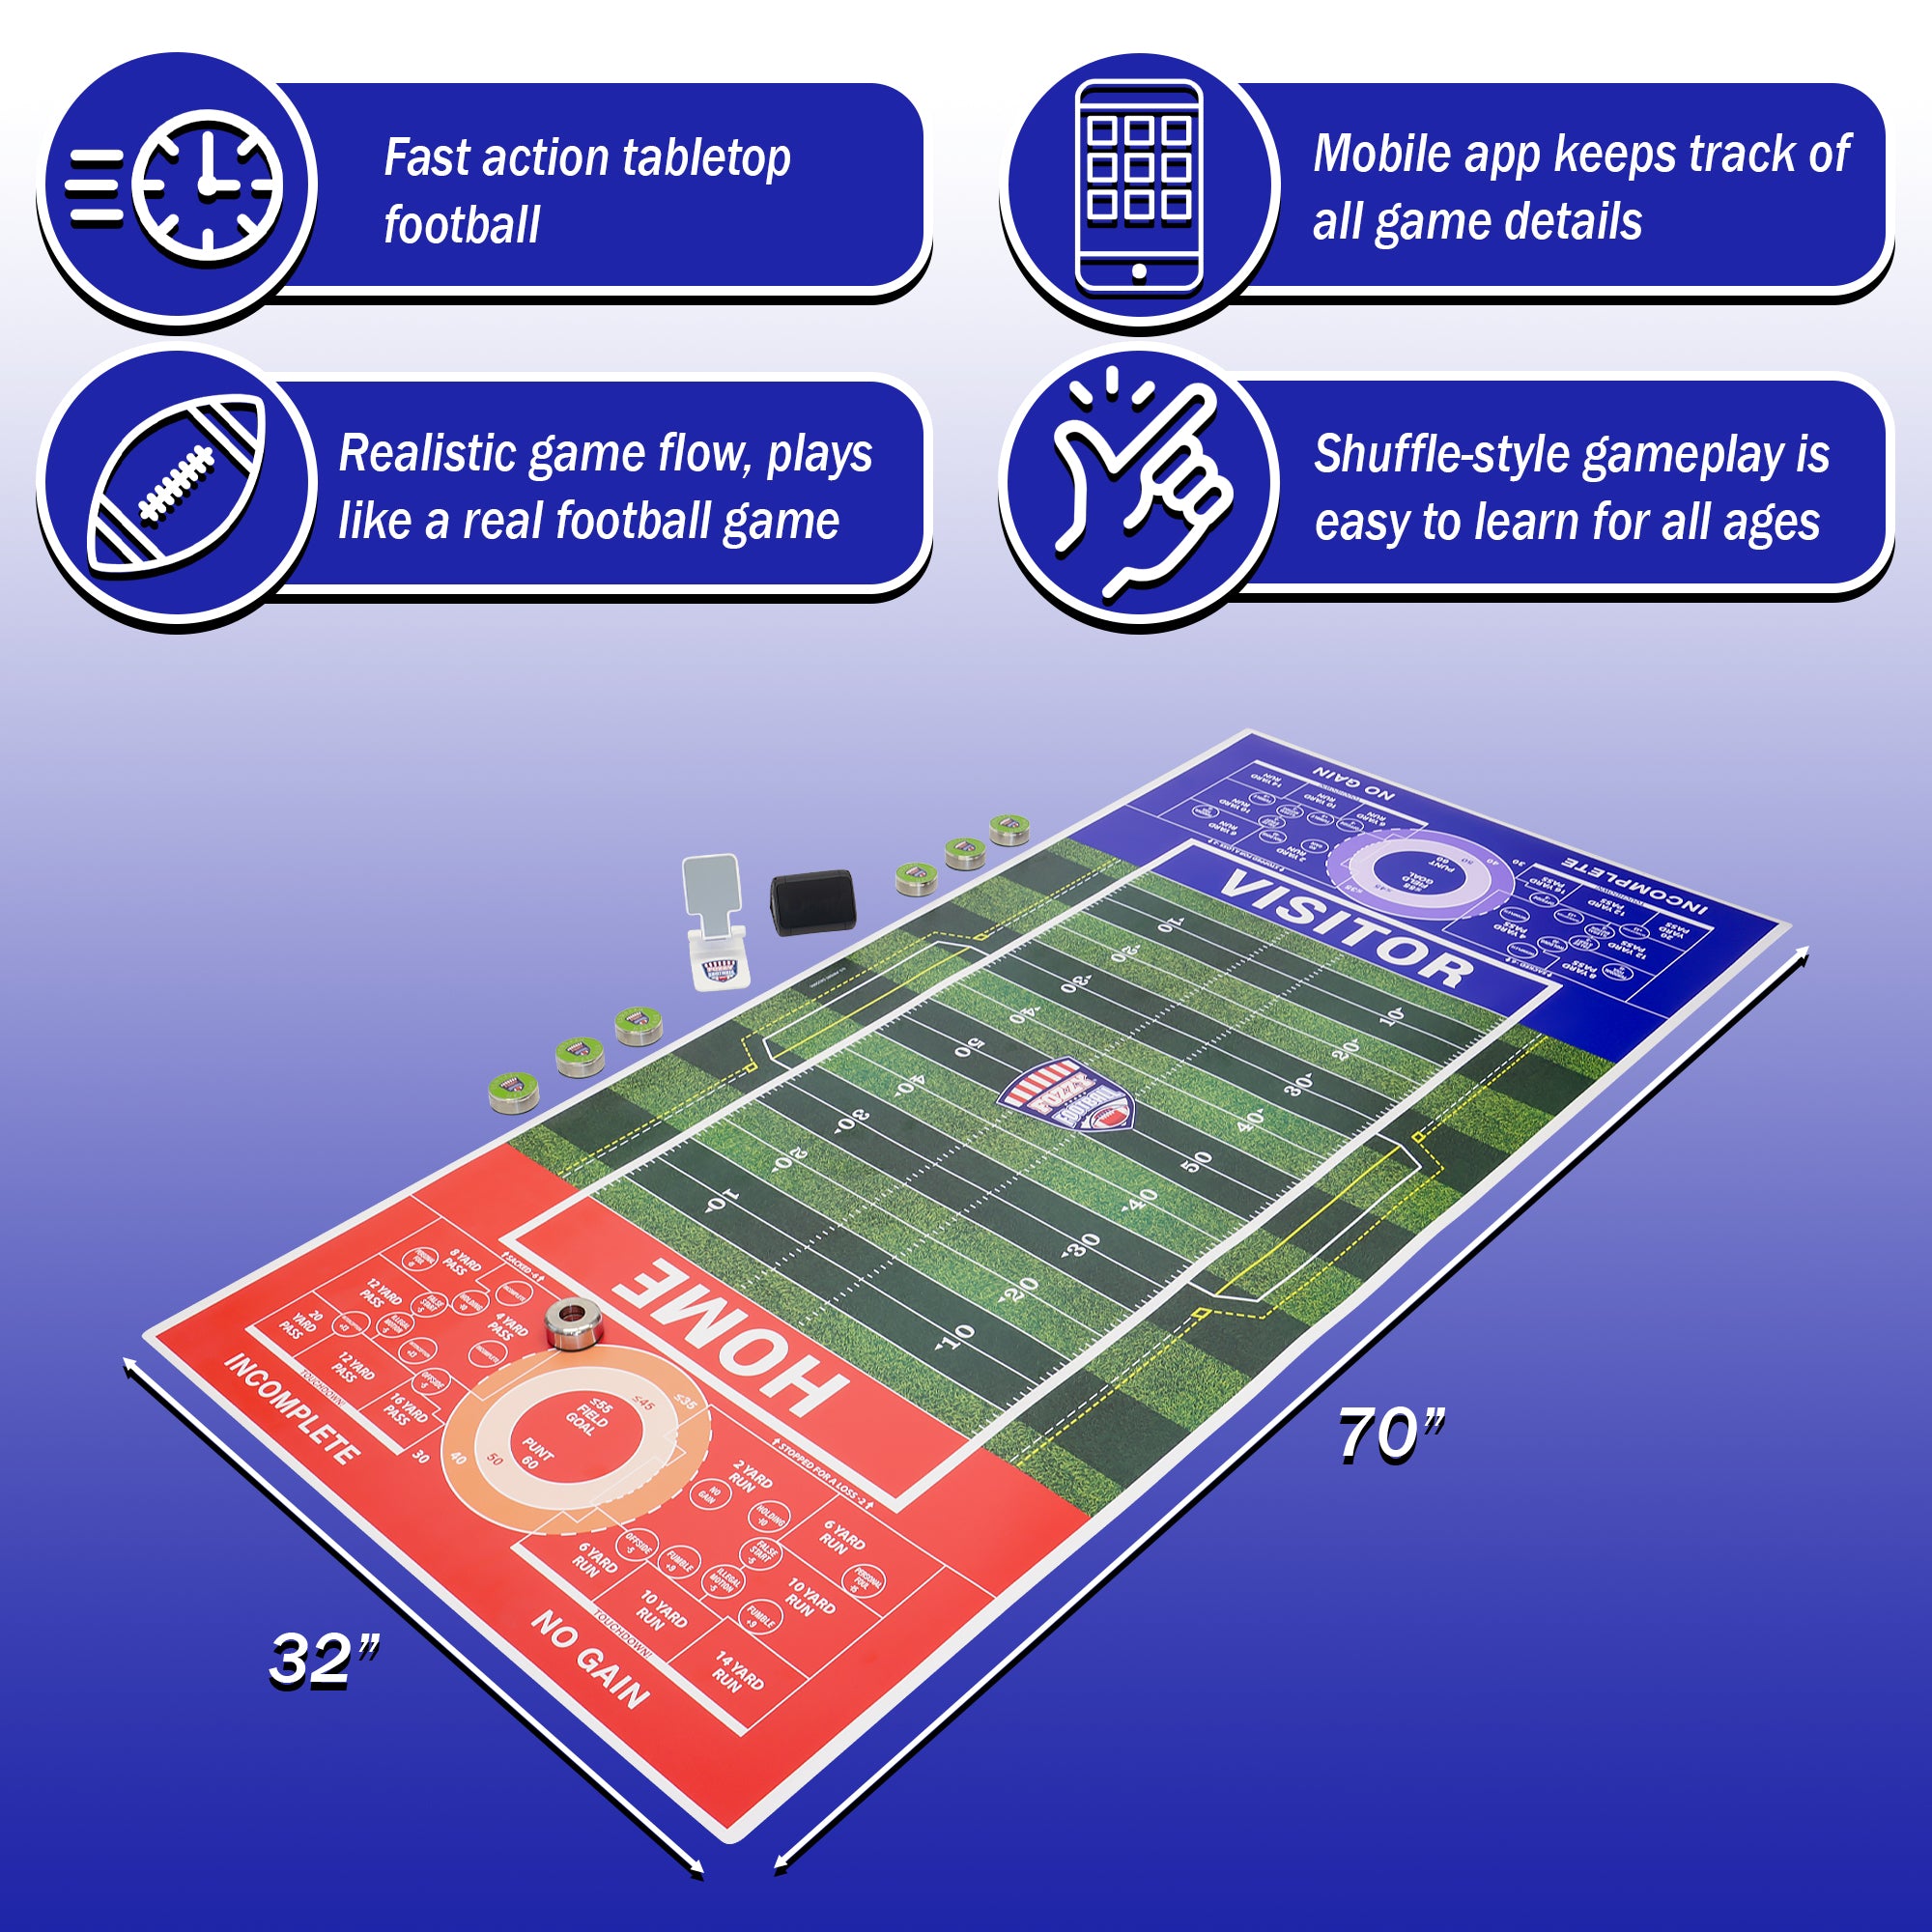 Fozzy Football Tabletop Set benefits and size 32x70